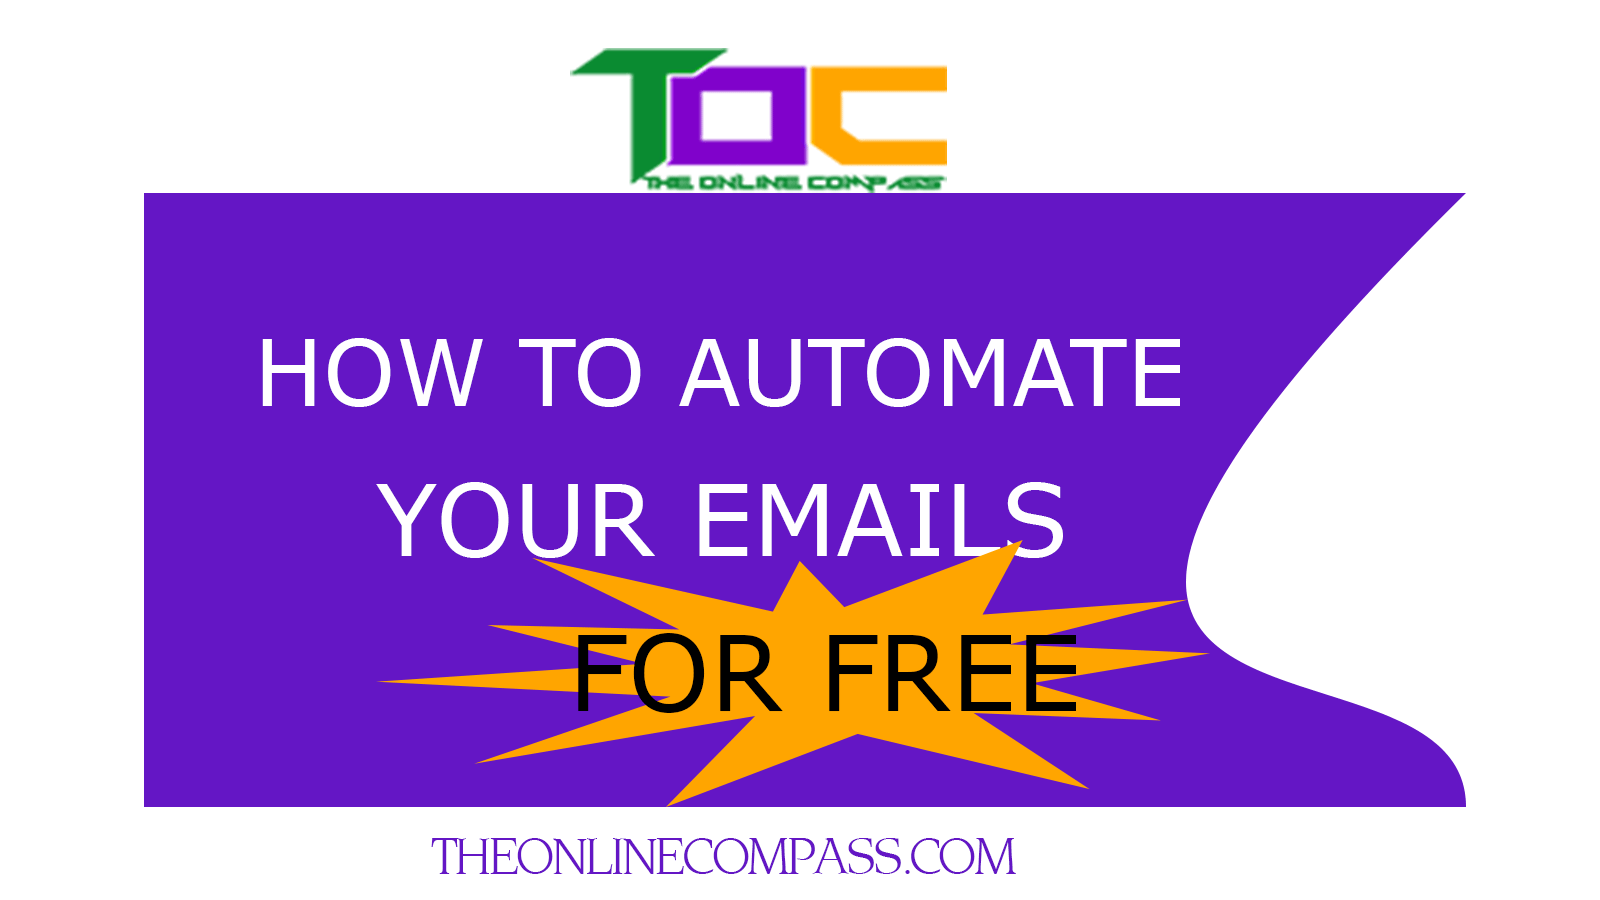 How to automate your email list building with-the best free email service provider